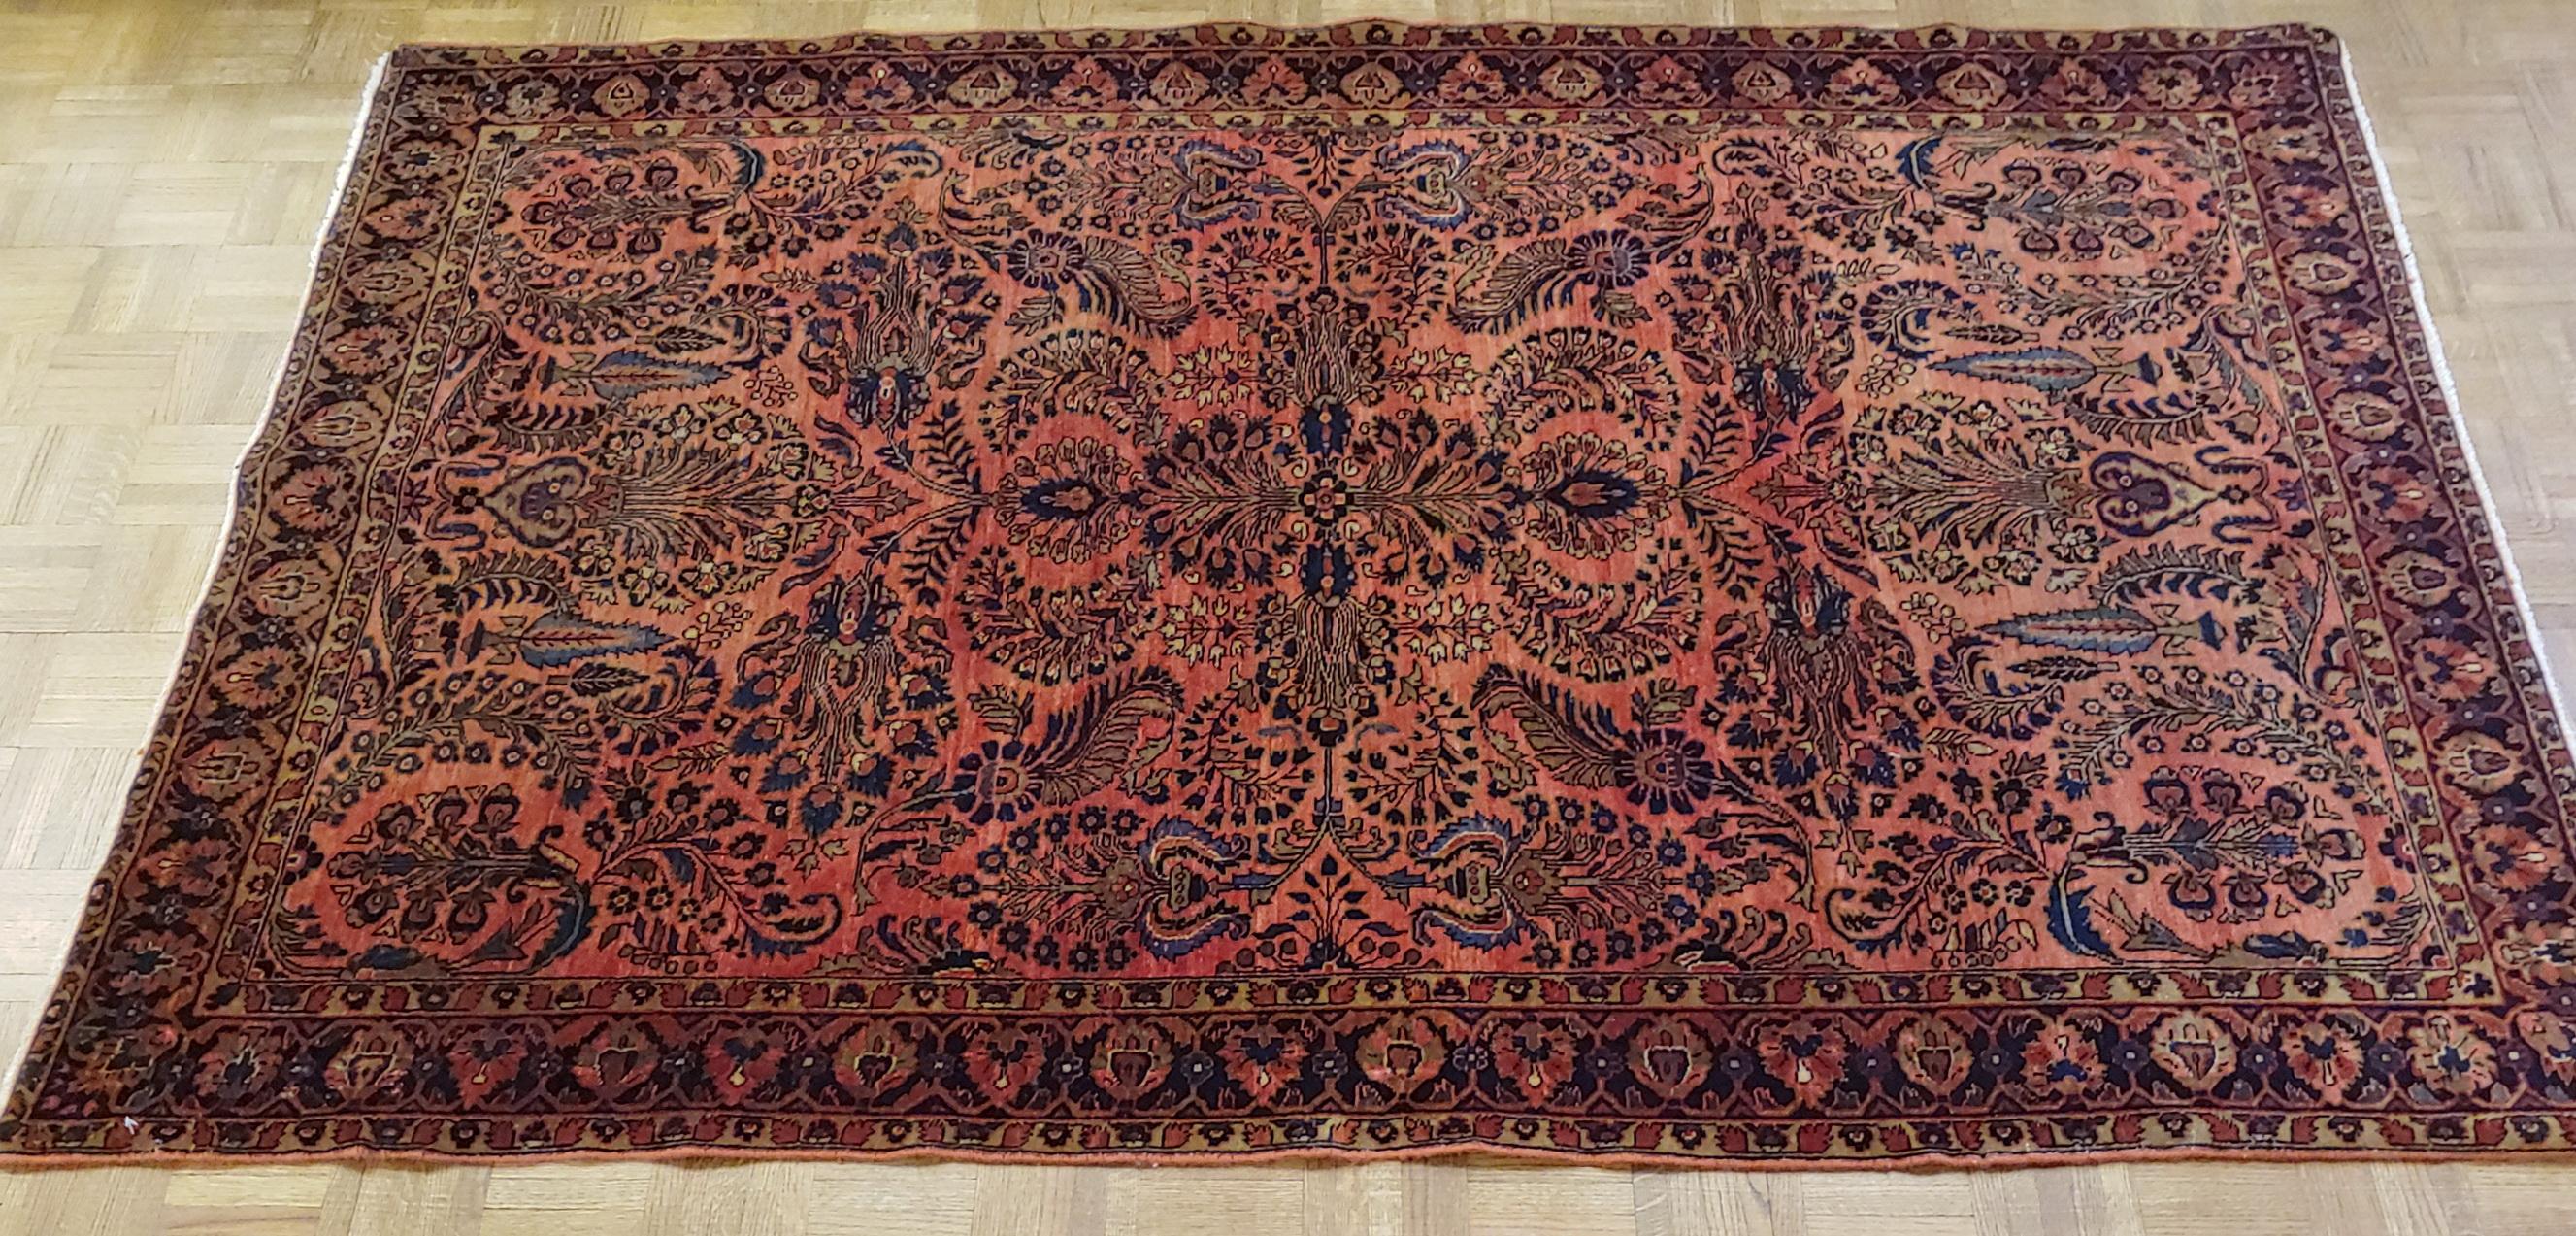 Woven Antique Persian Sarouk, silky wool All-Over Design on Rust Field, Wool, 4x6 1915 For Sale